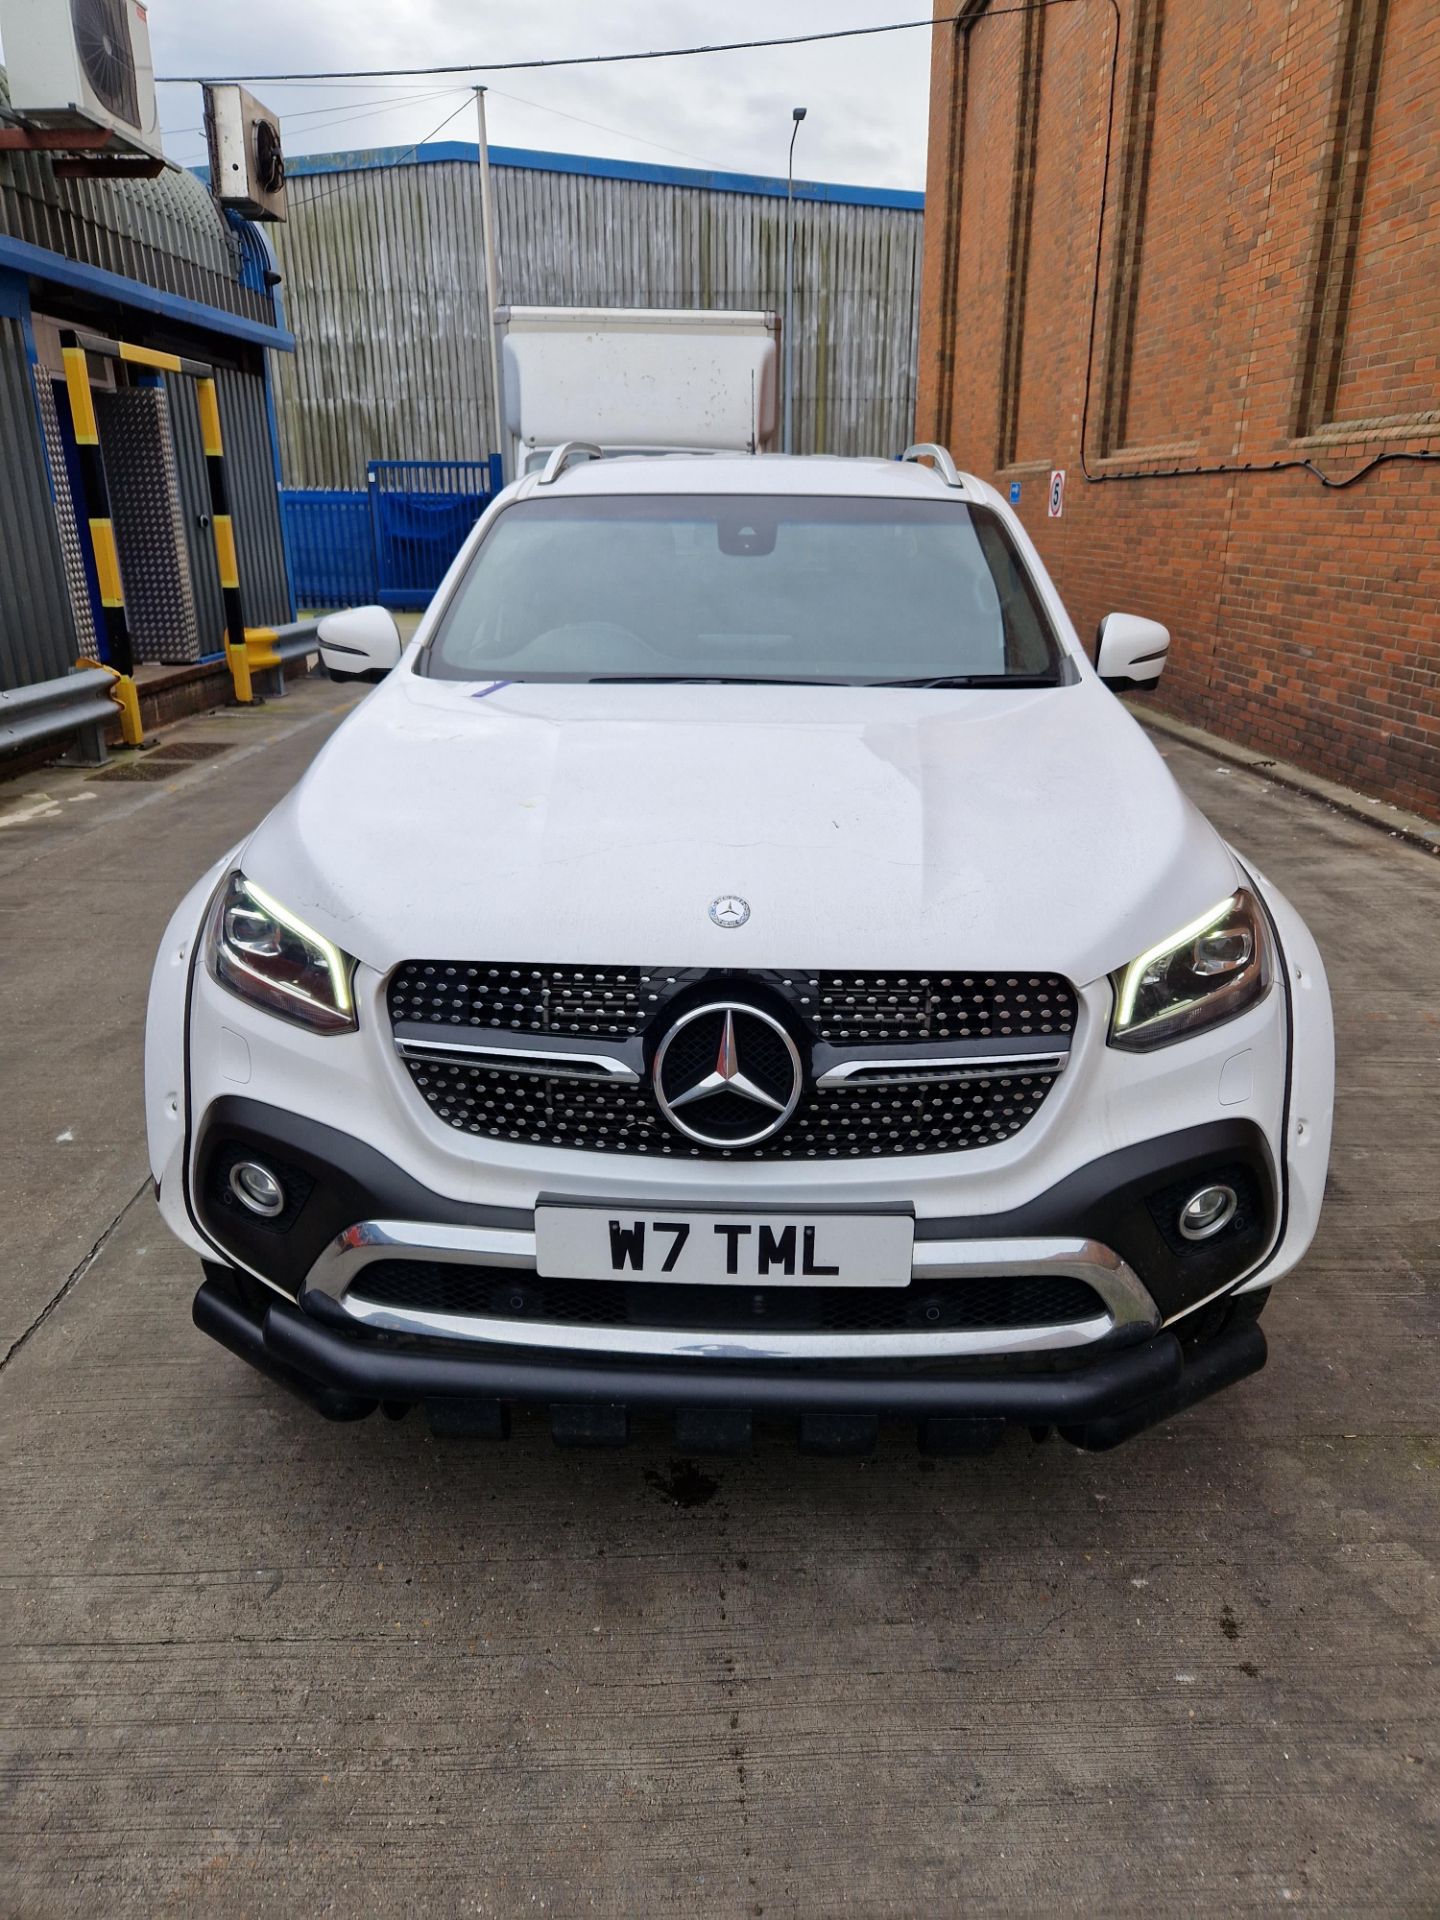 Mercedes Benz X Class X350D 4Matic V6 Turbo Double Cab Pickup, registration no. W7 TML, date first - Image 2 of 10